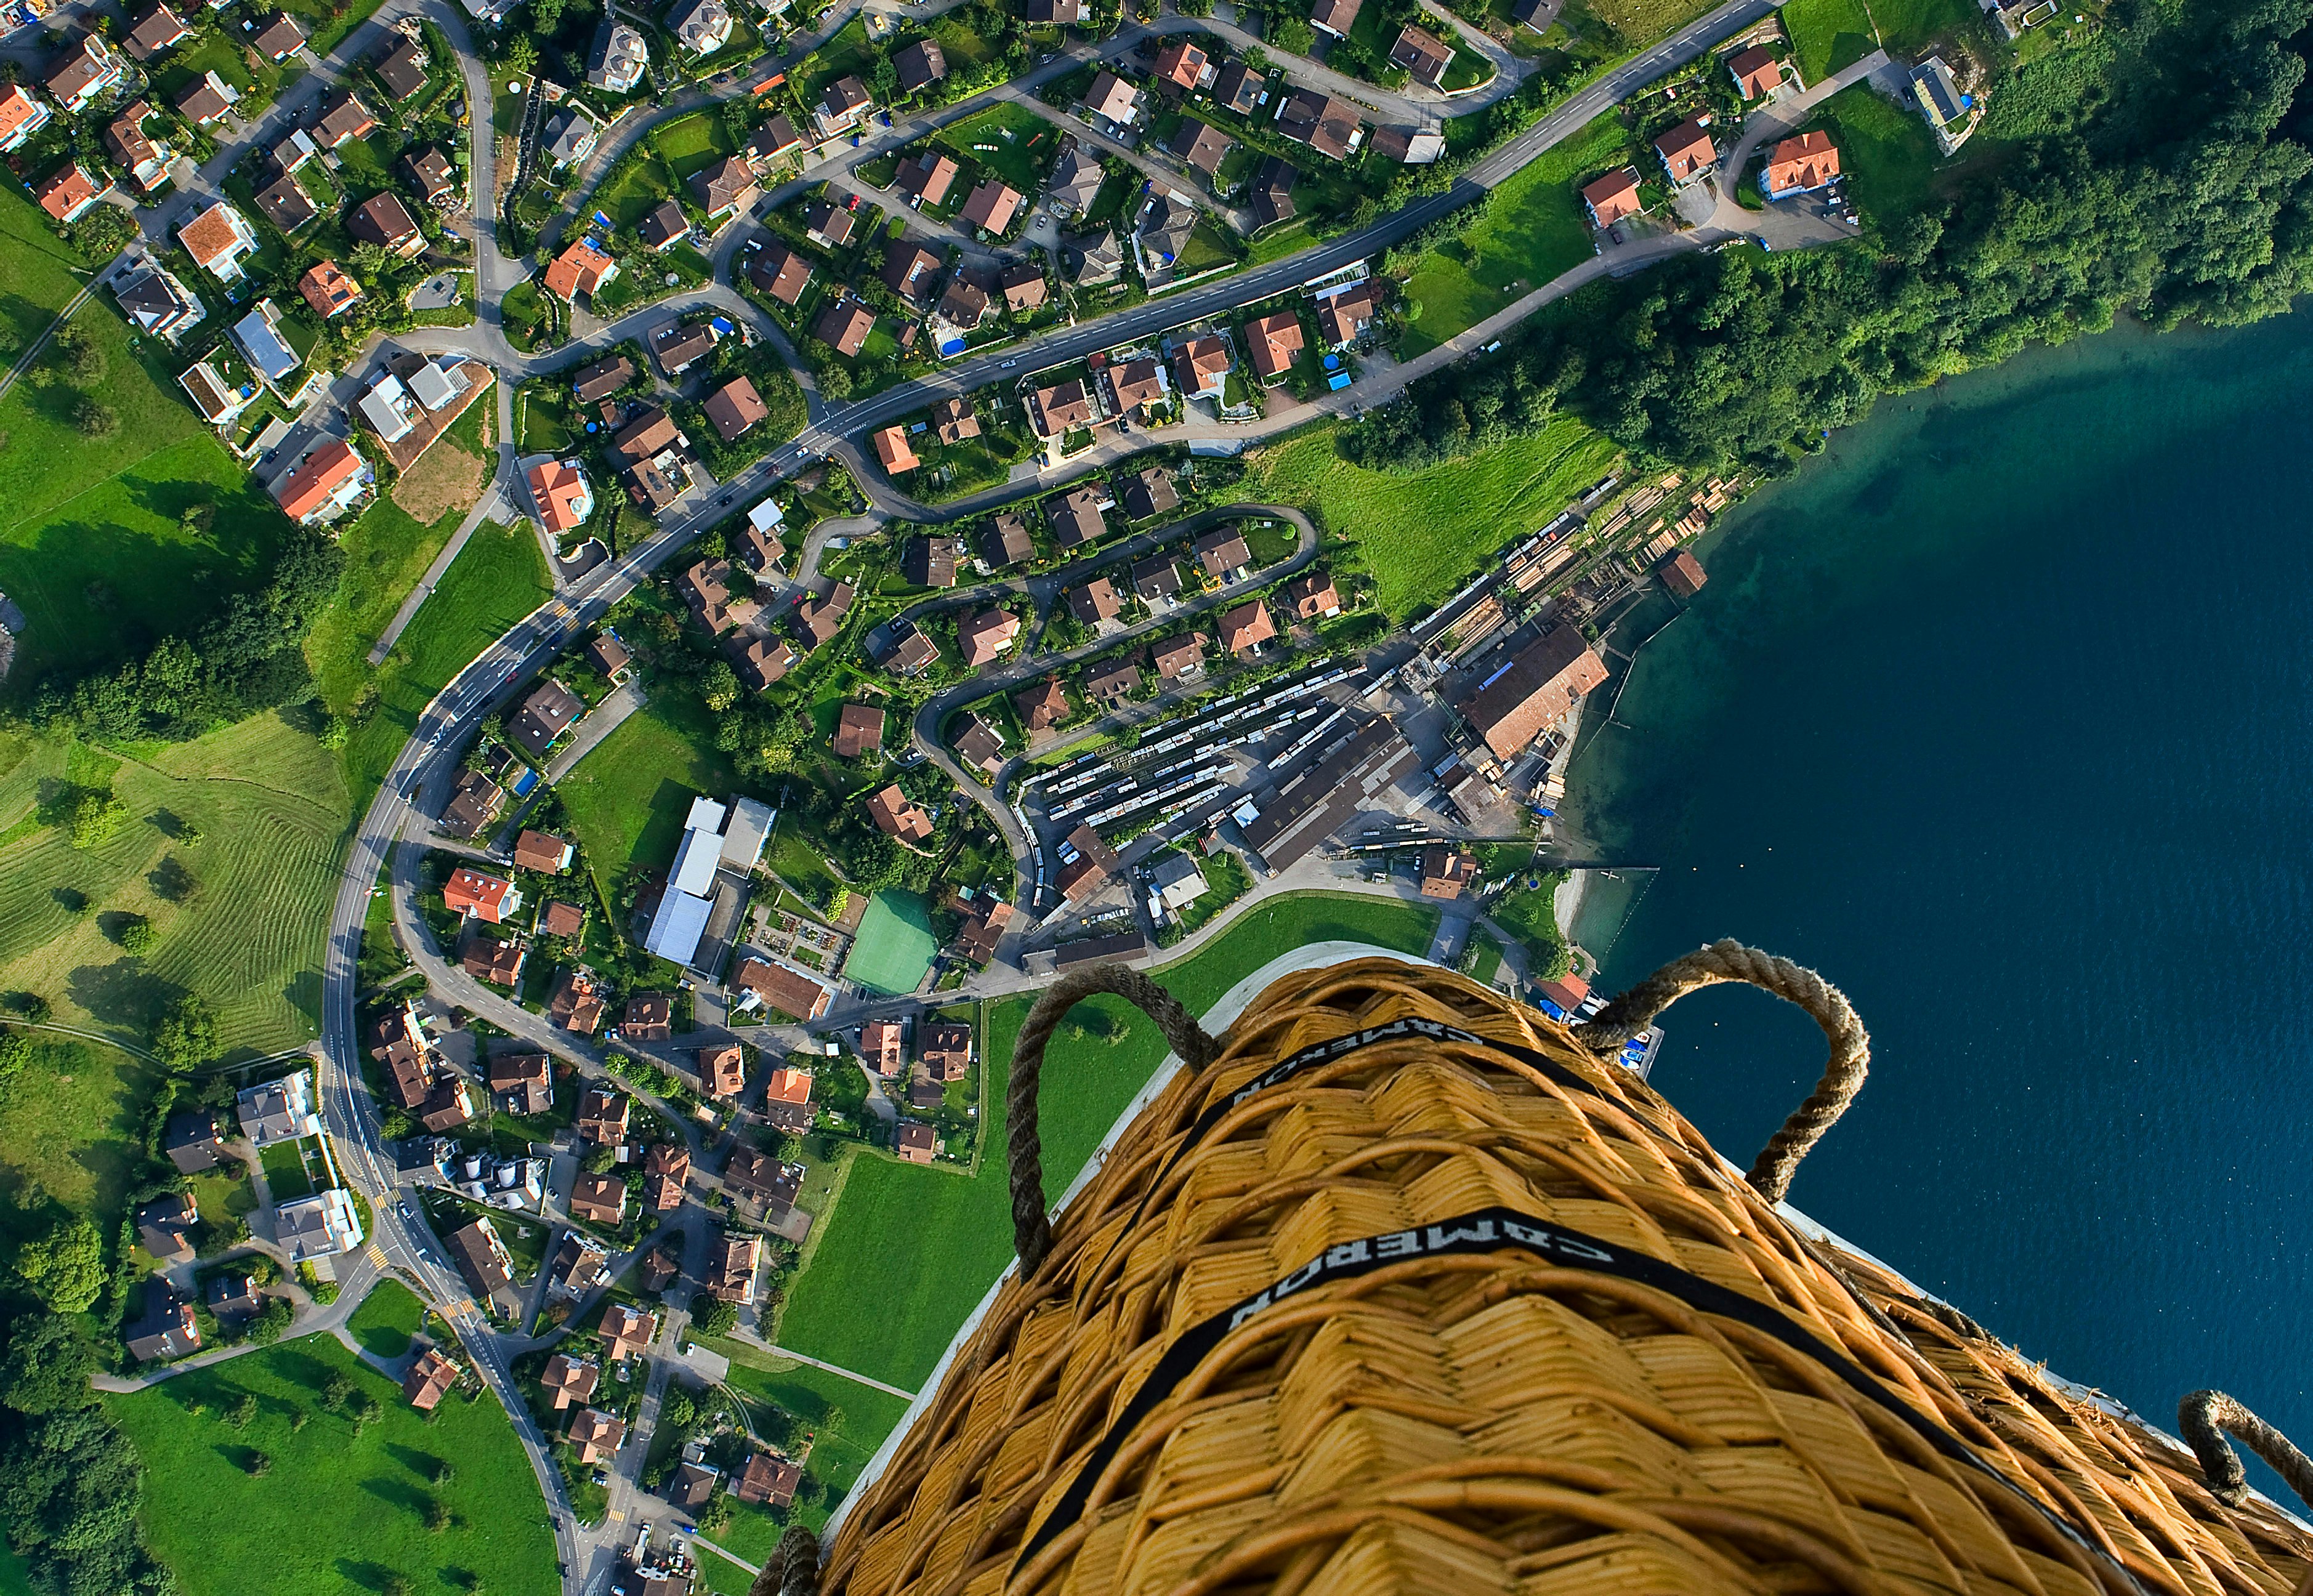 person riding hot air balloon taking photo of village near sea during daytime